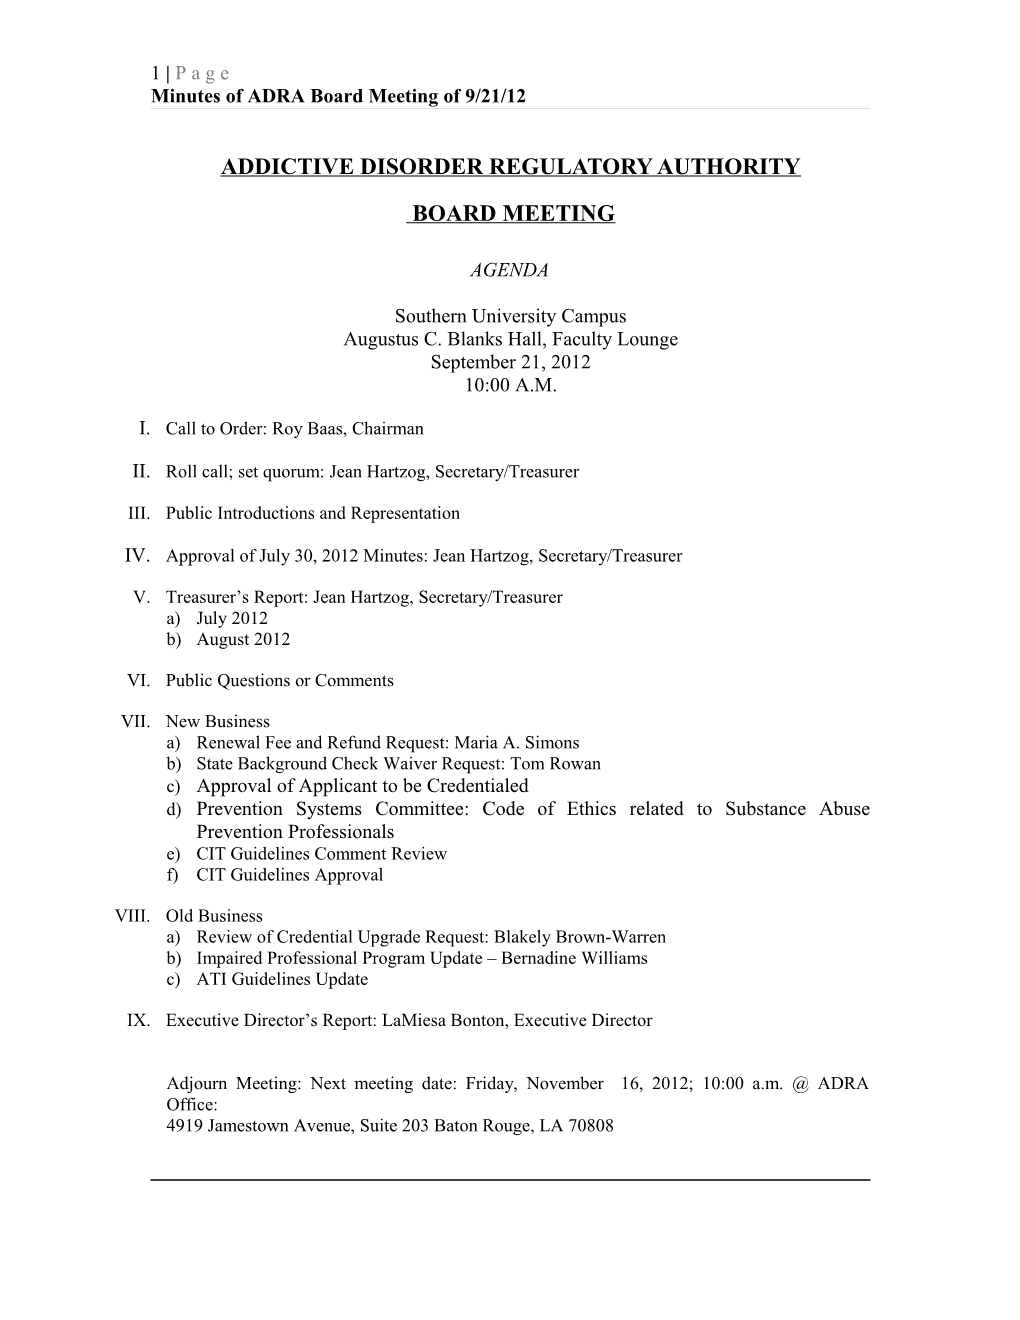 Minutes of ADRA Board Meeting of 9/21/12